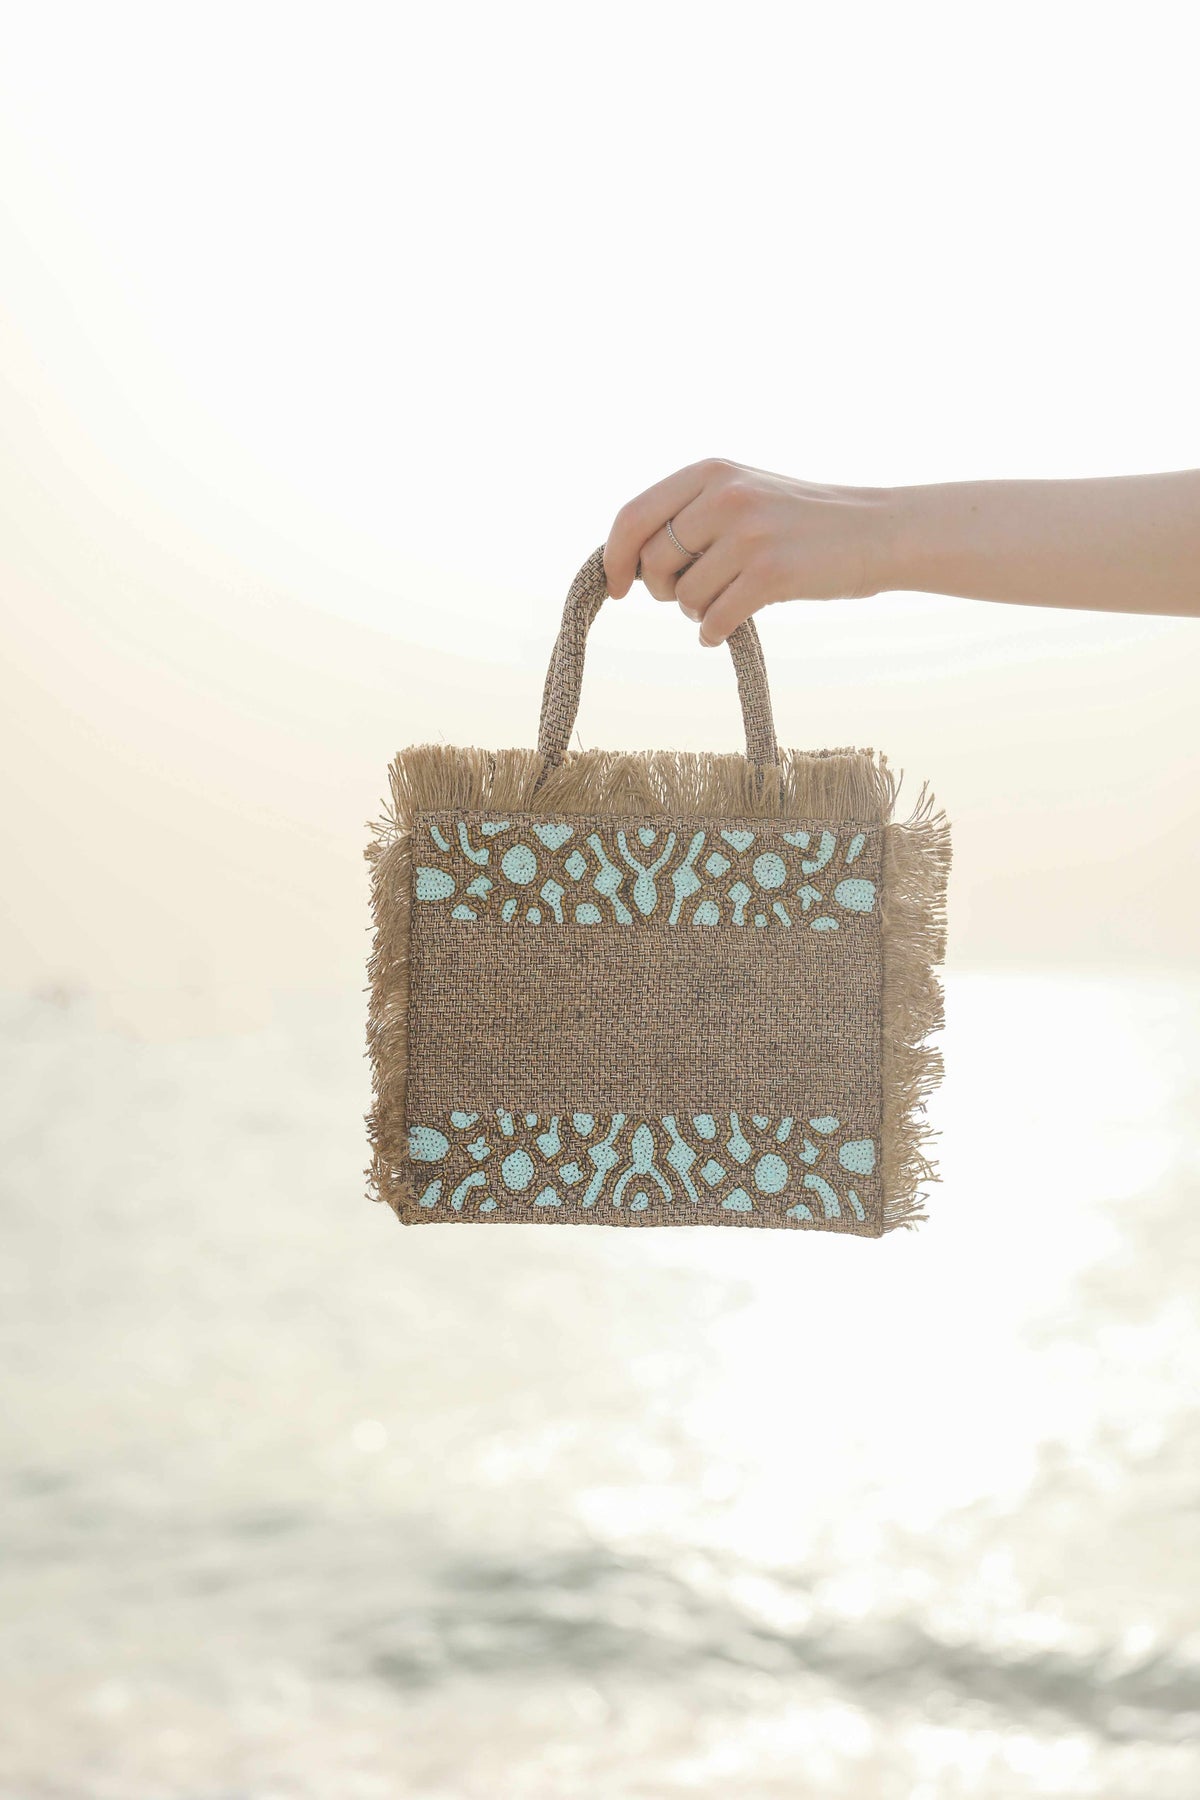 Snake pattern small tote design